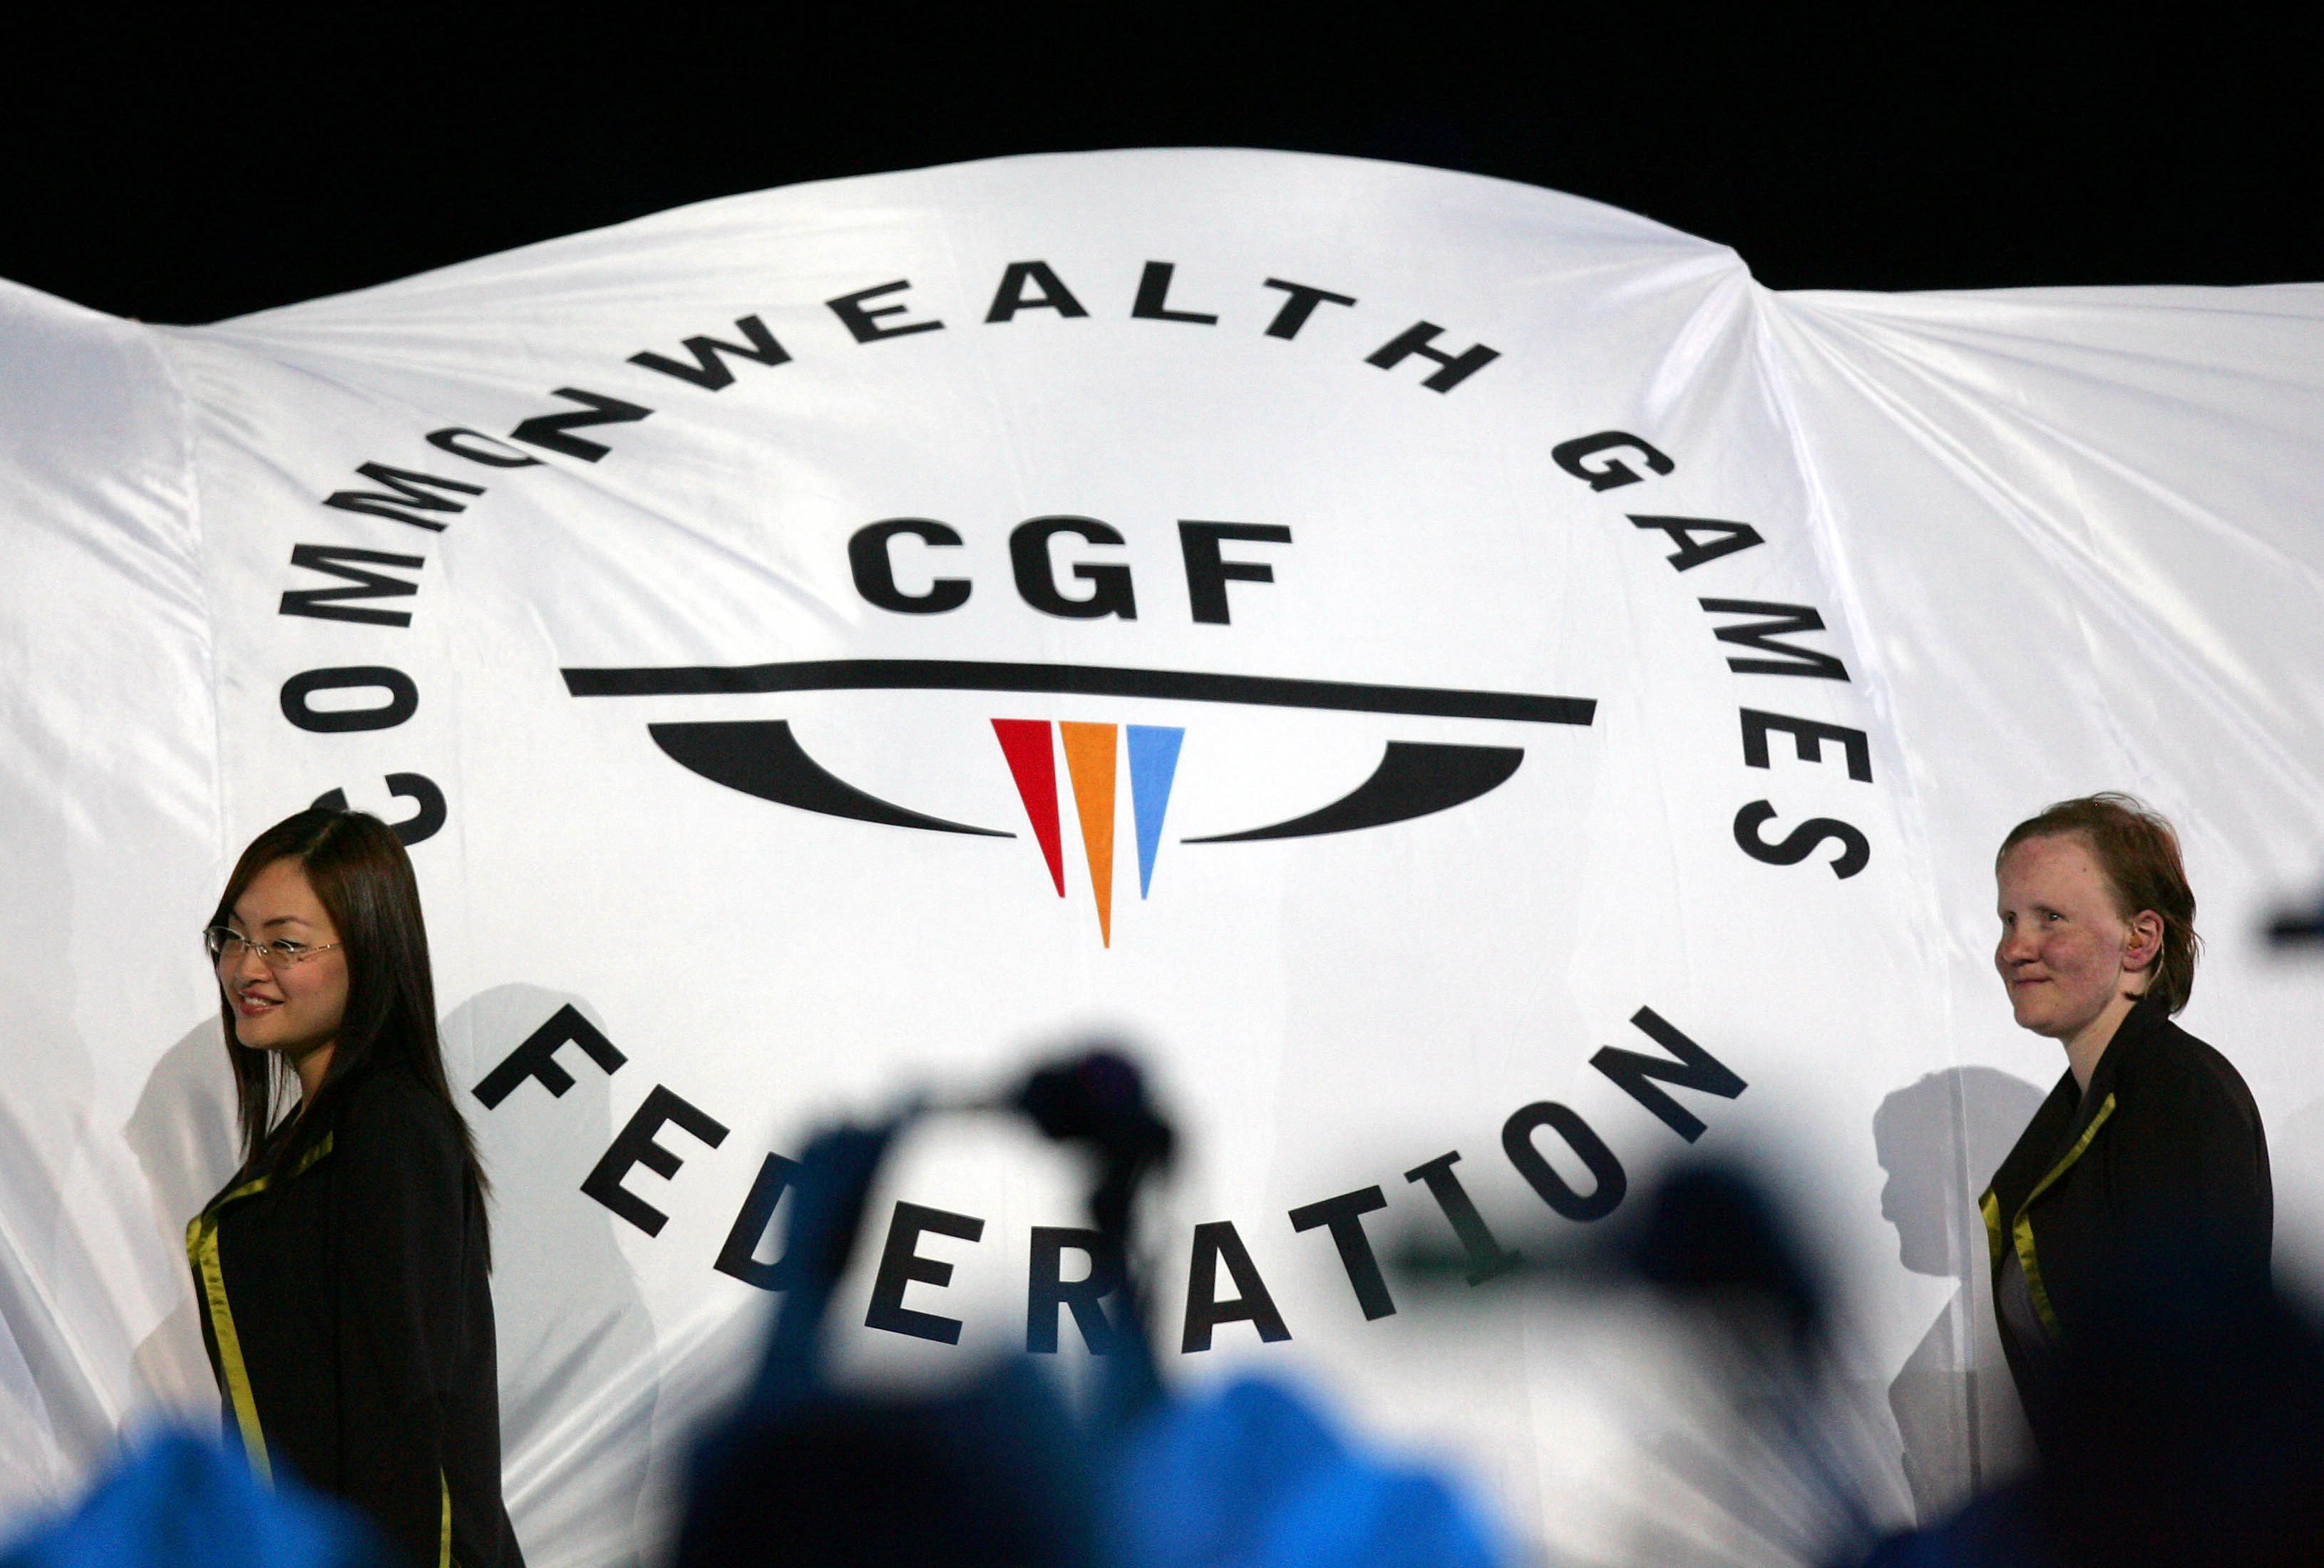 The Commonwealth Games Federation said it was “excited by the early concepts, which aim to reset and reframe the Games”. Photo: AP